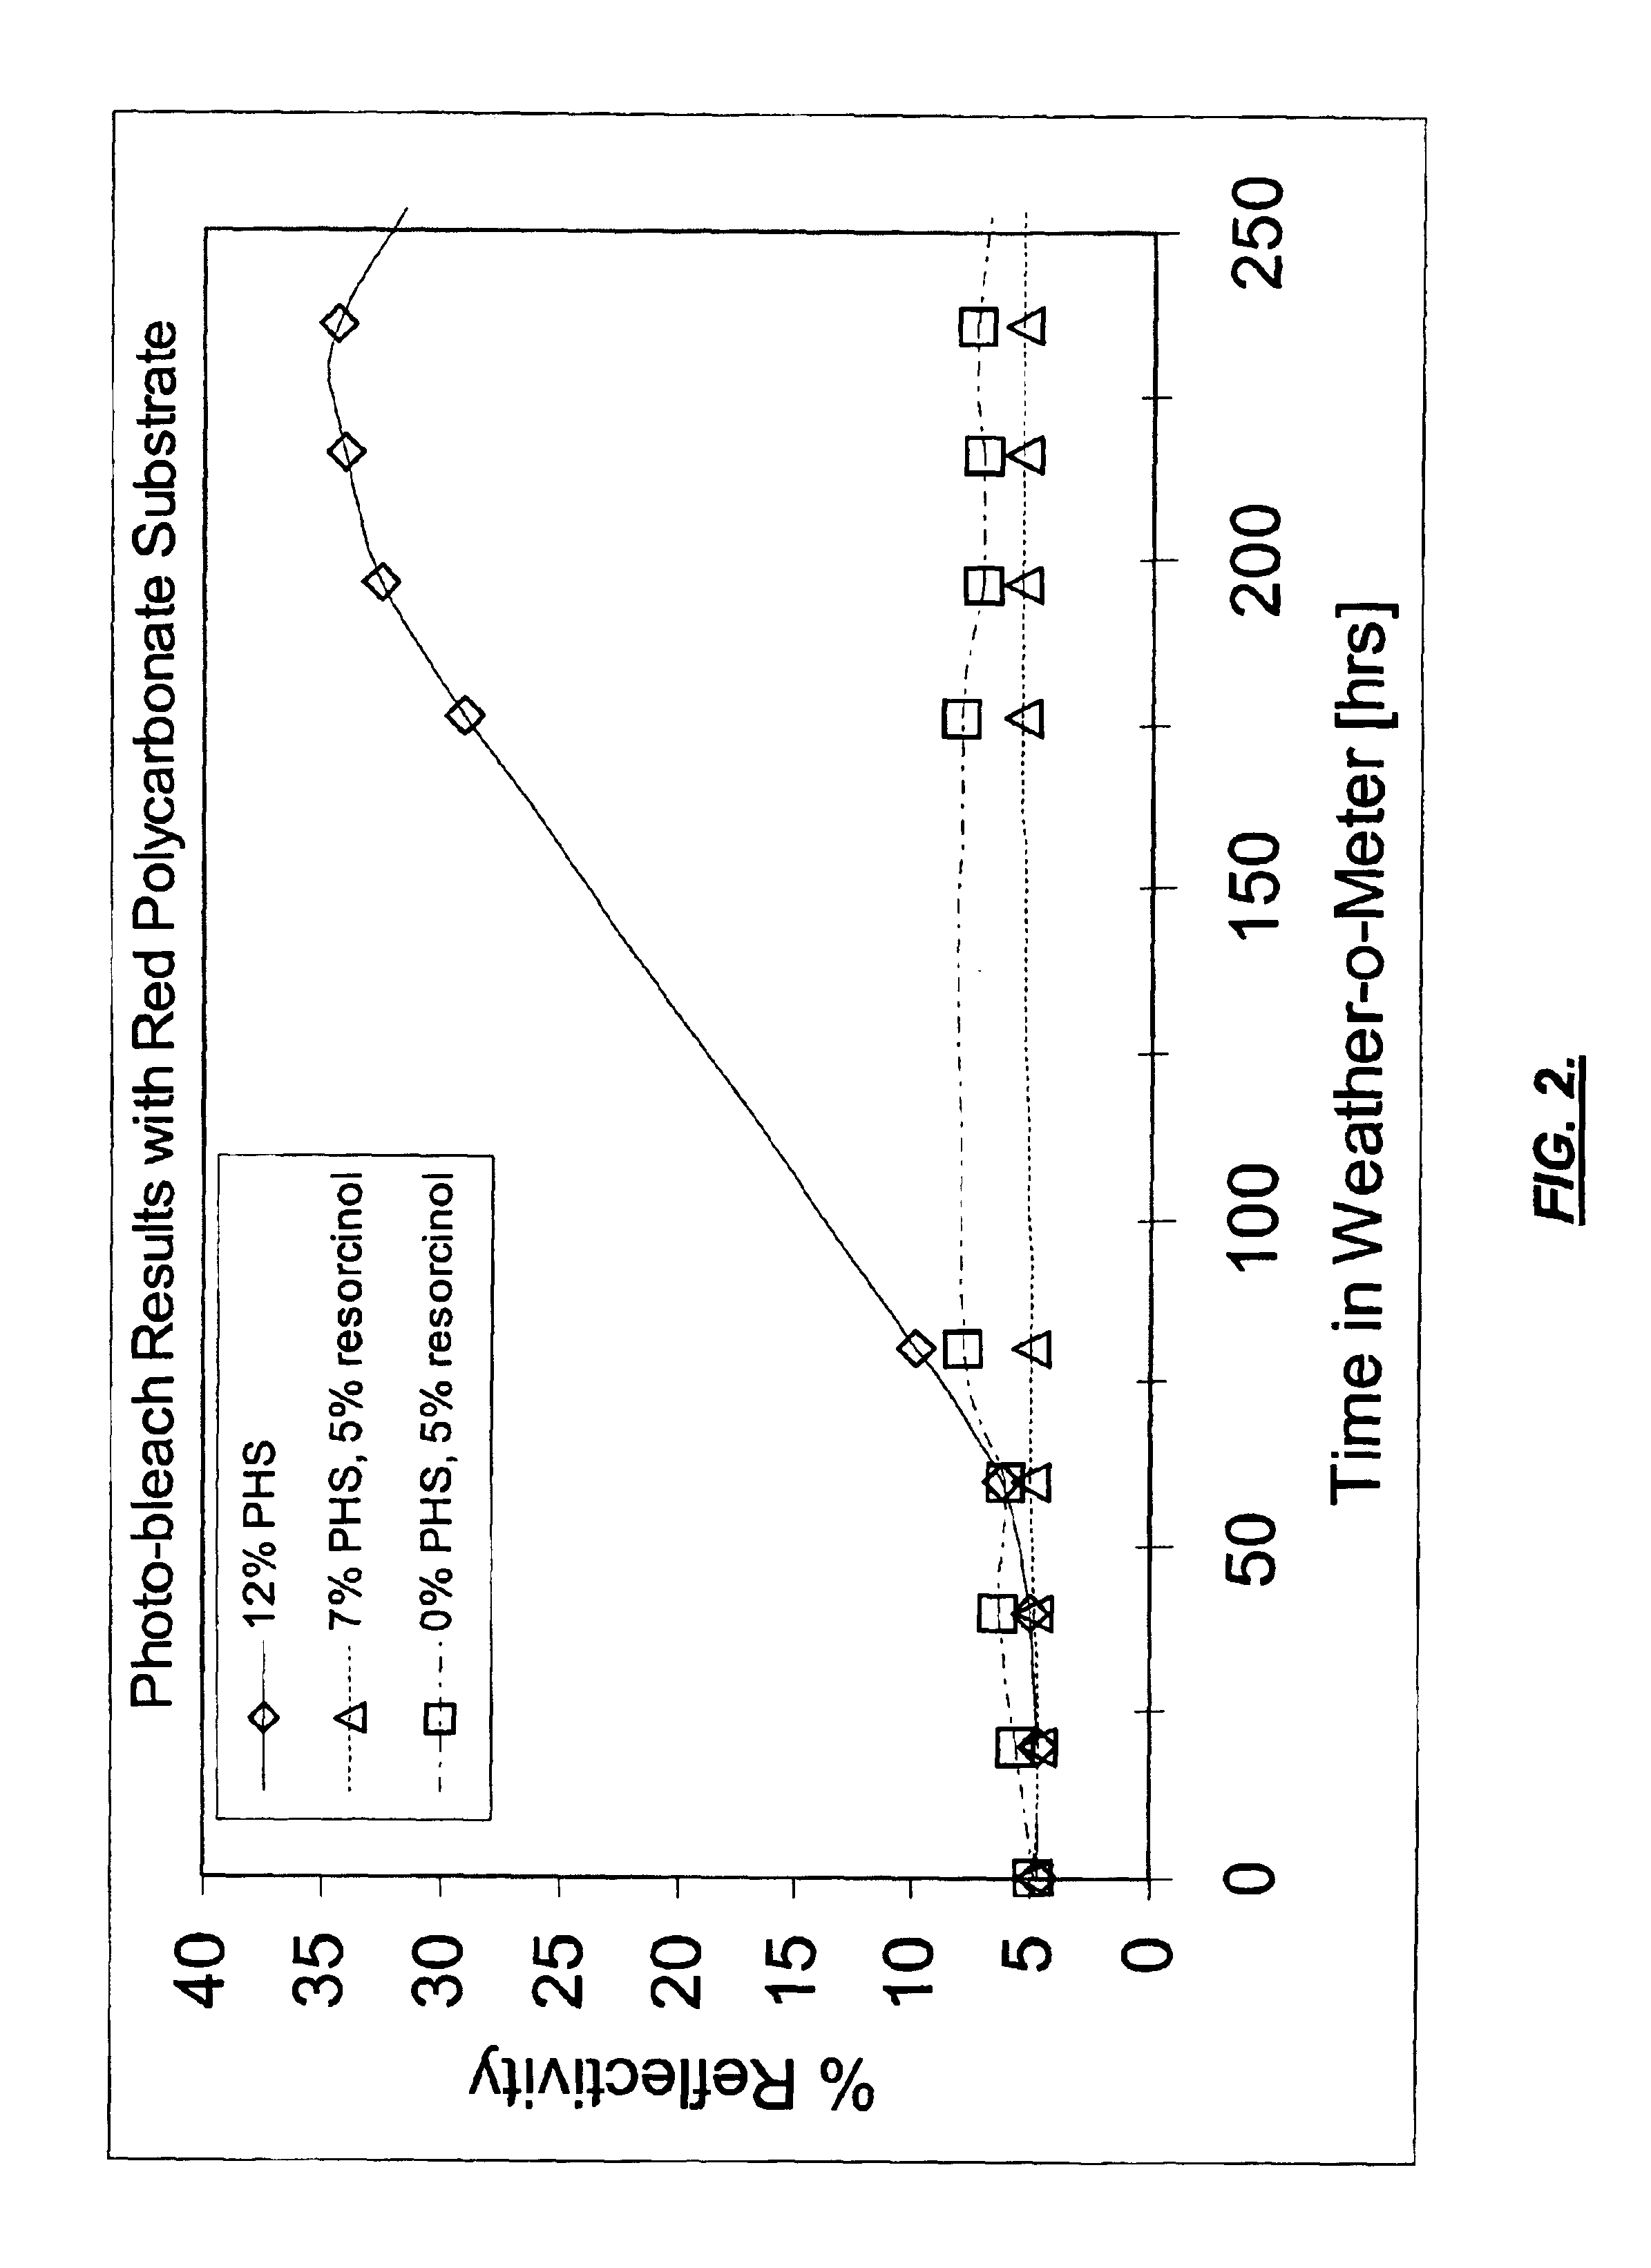 Limited play data storage media and associated methods of manufacture